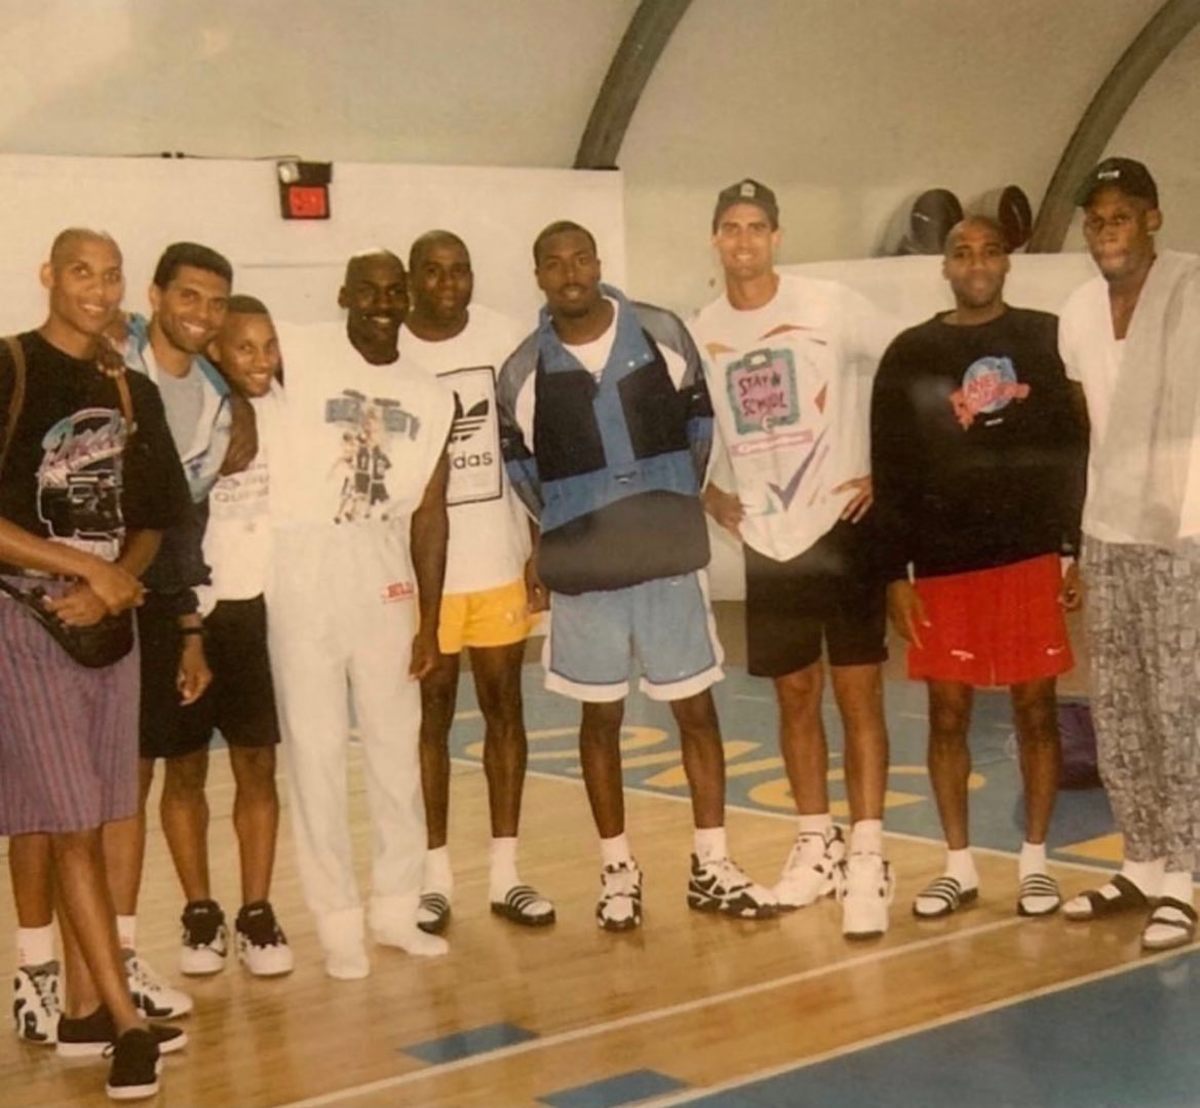 Tim Grover Shared An Iconic Photo Of Michael Jordan, Magic Johnson, Dennis Rodman, Reggie Miller, And Other Stars From The Space Jam 'Jordan Dome'